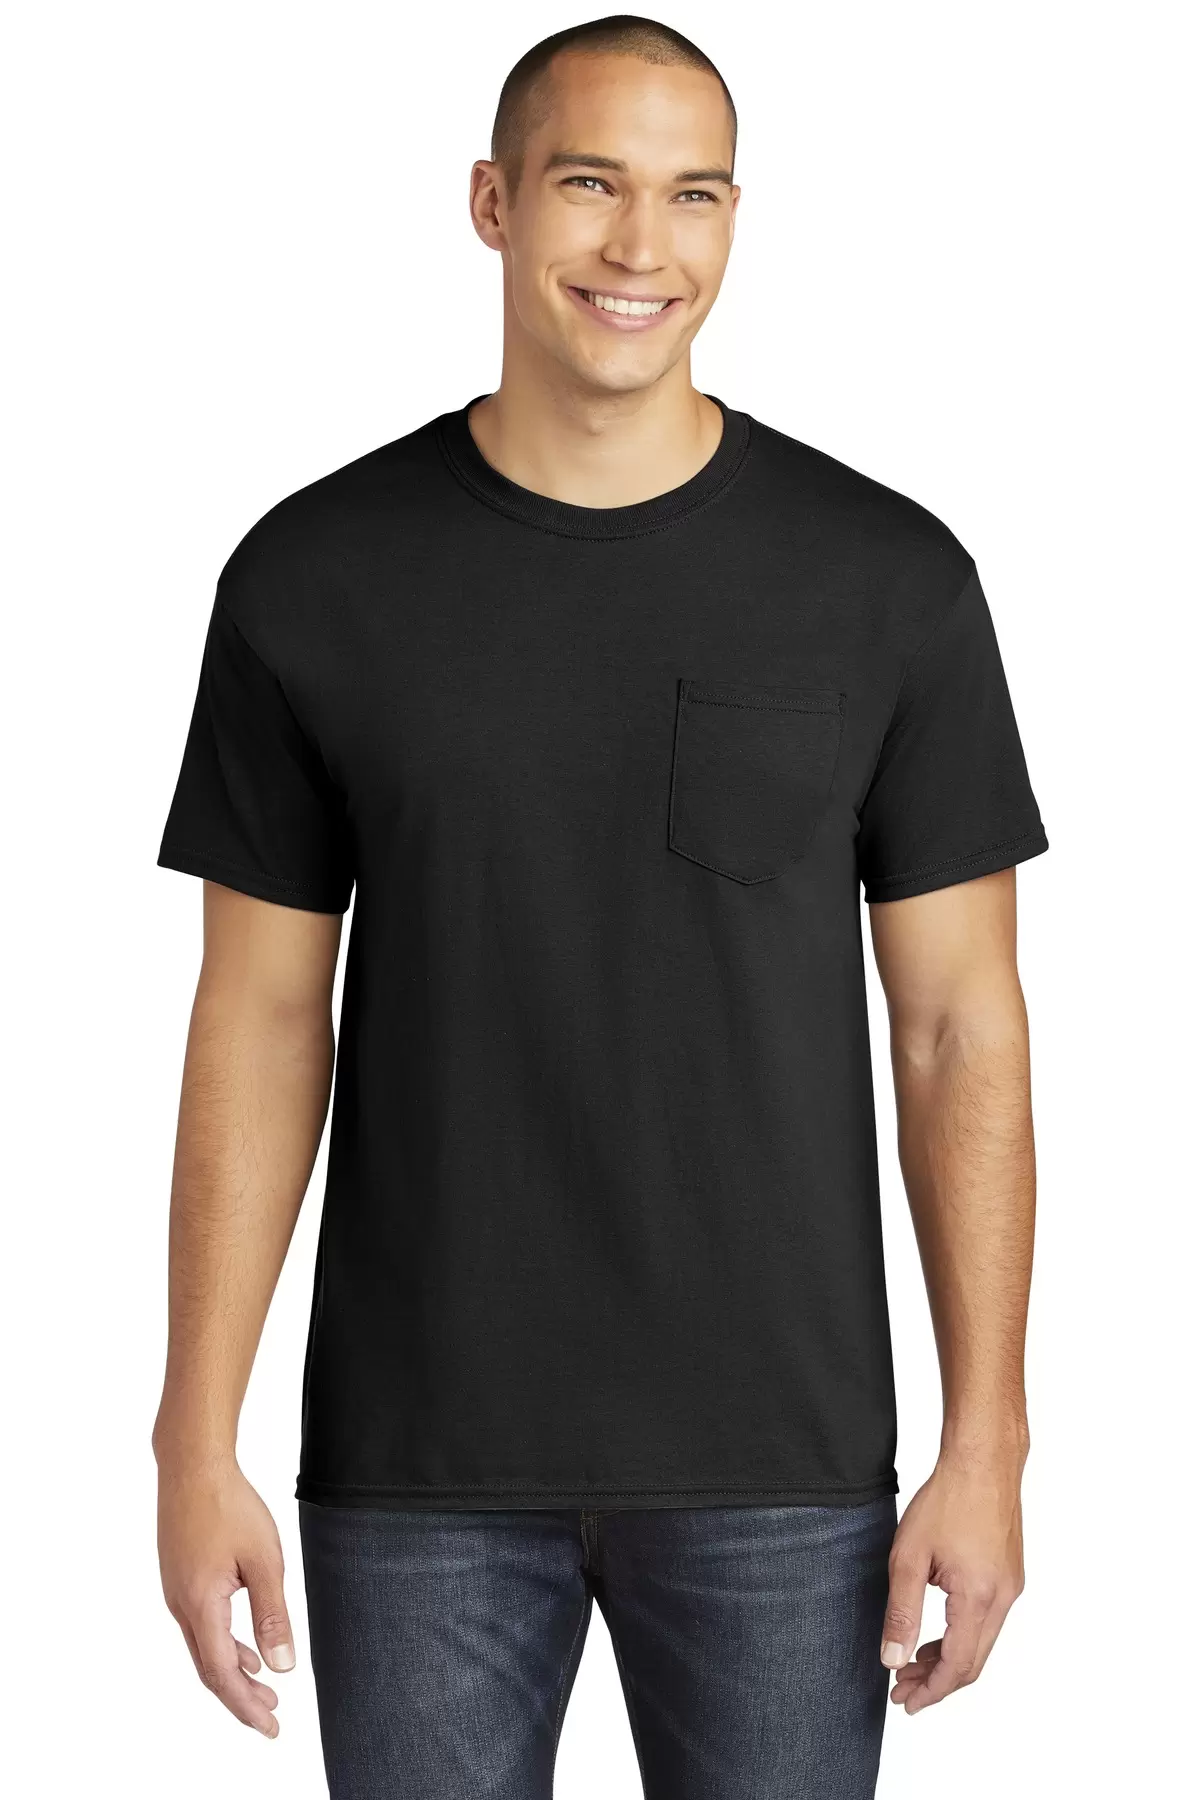 Gildan 5300 Heavy Cotton T-Shirt with a Pocket - From $4.42